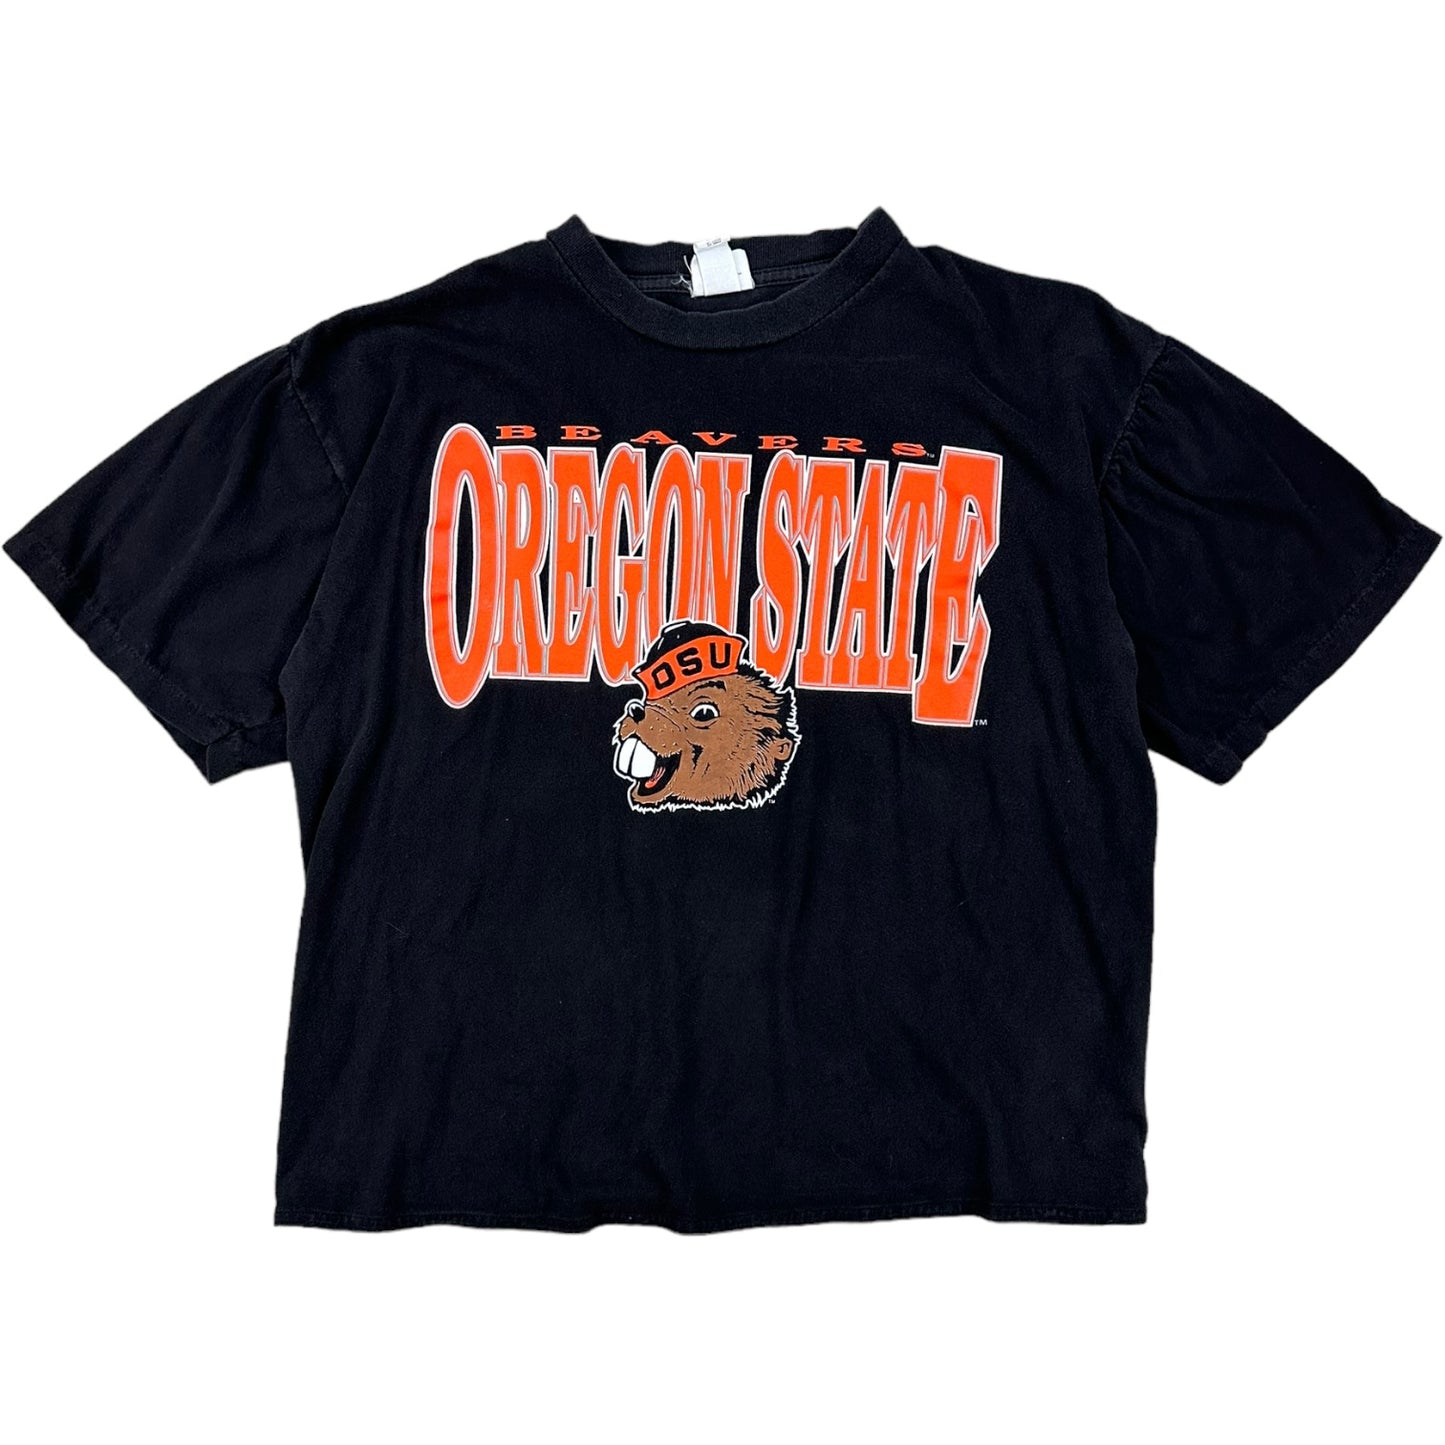 Oregon State Single Stitch Tee- CROPPED L (small length)